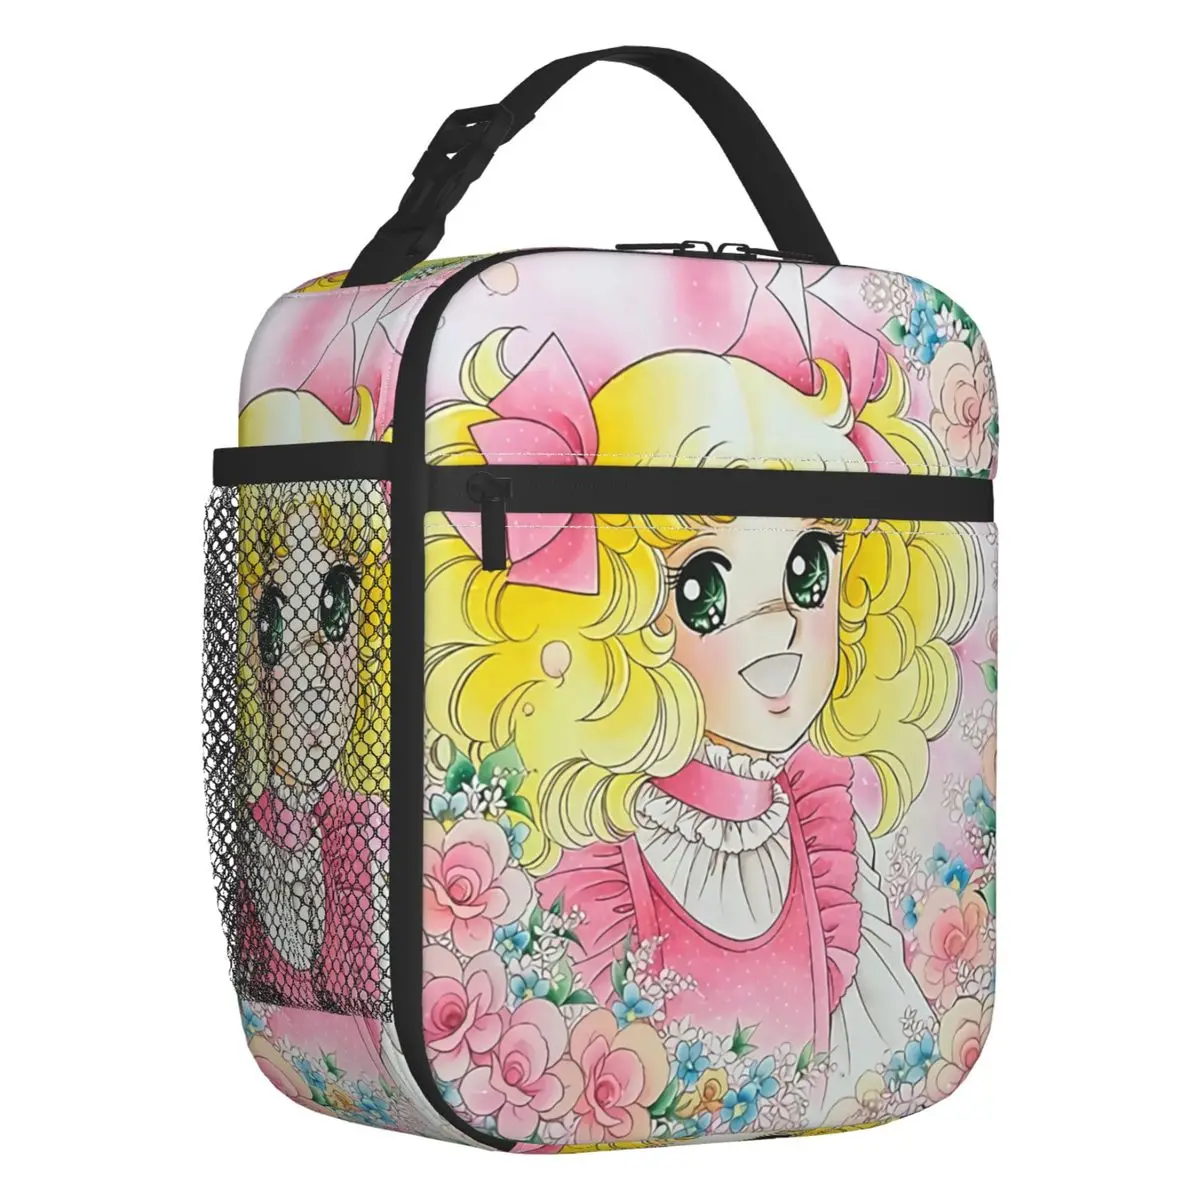 

Candy Candy Candice Insulated Lunch Bag for Women Portable Japan Anime Manga Cooler Thermal Bento Box Kids School Children